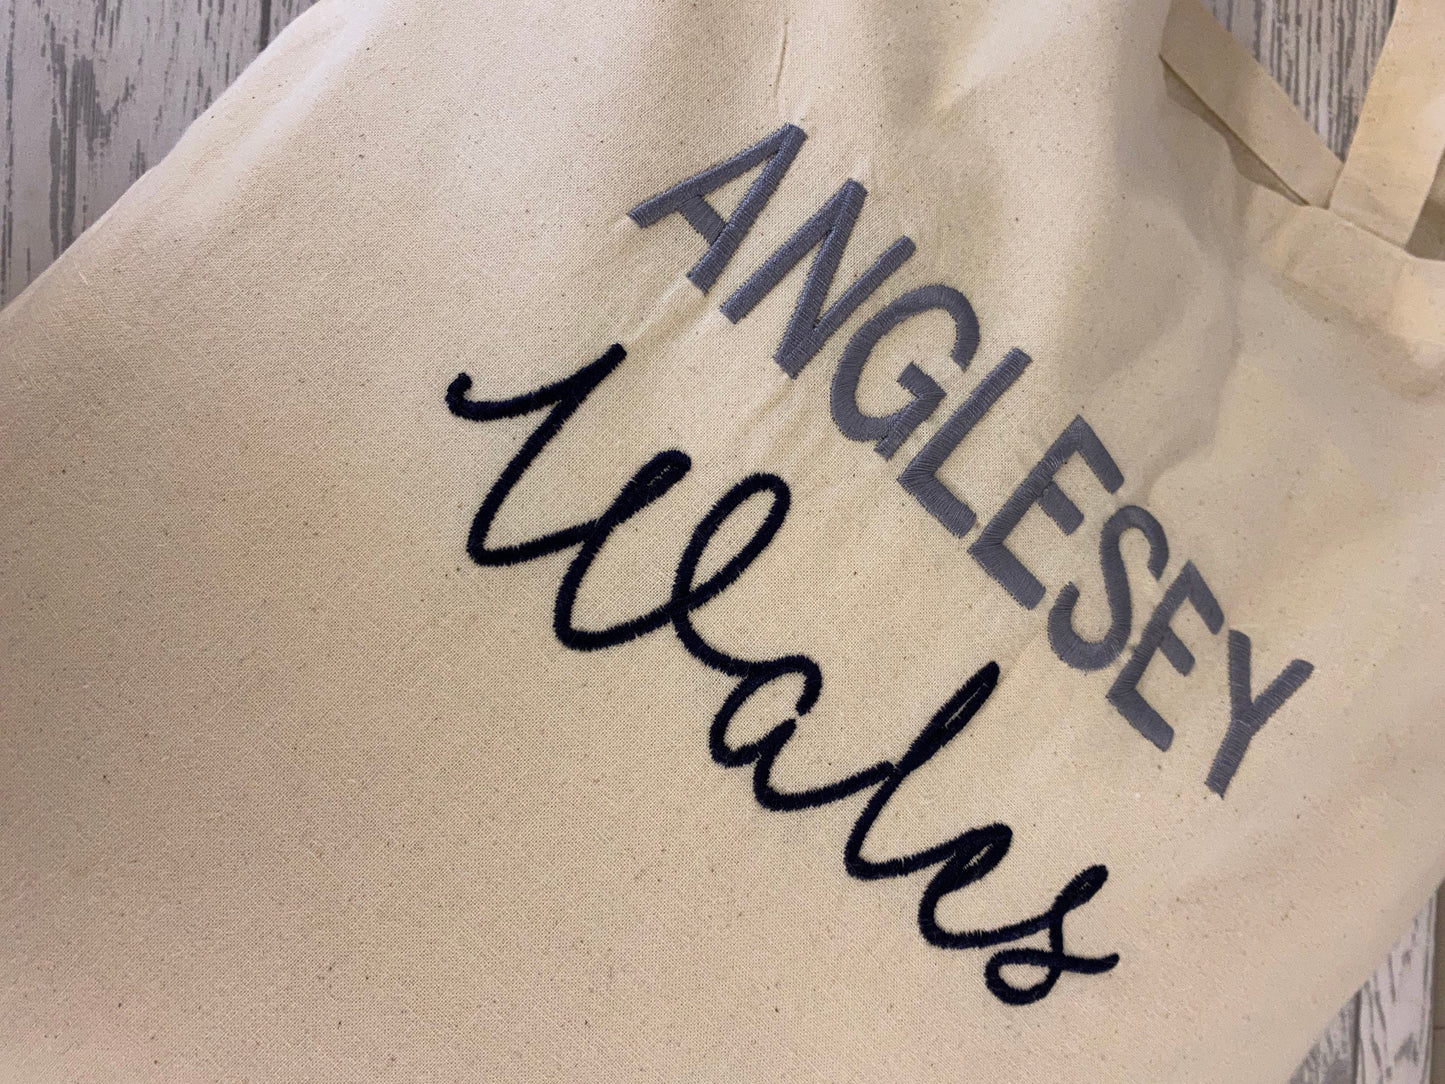 Lovely lightweight tote bag with embroidered text Anglesey Wales